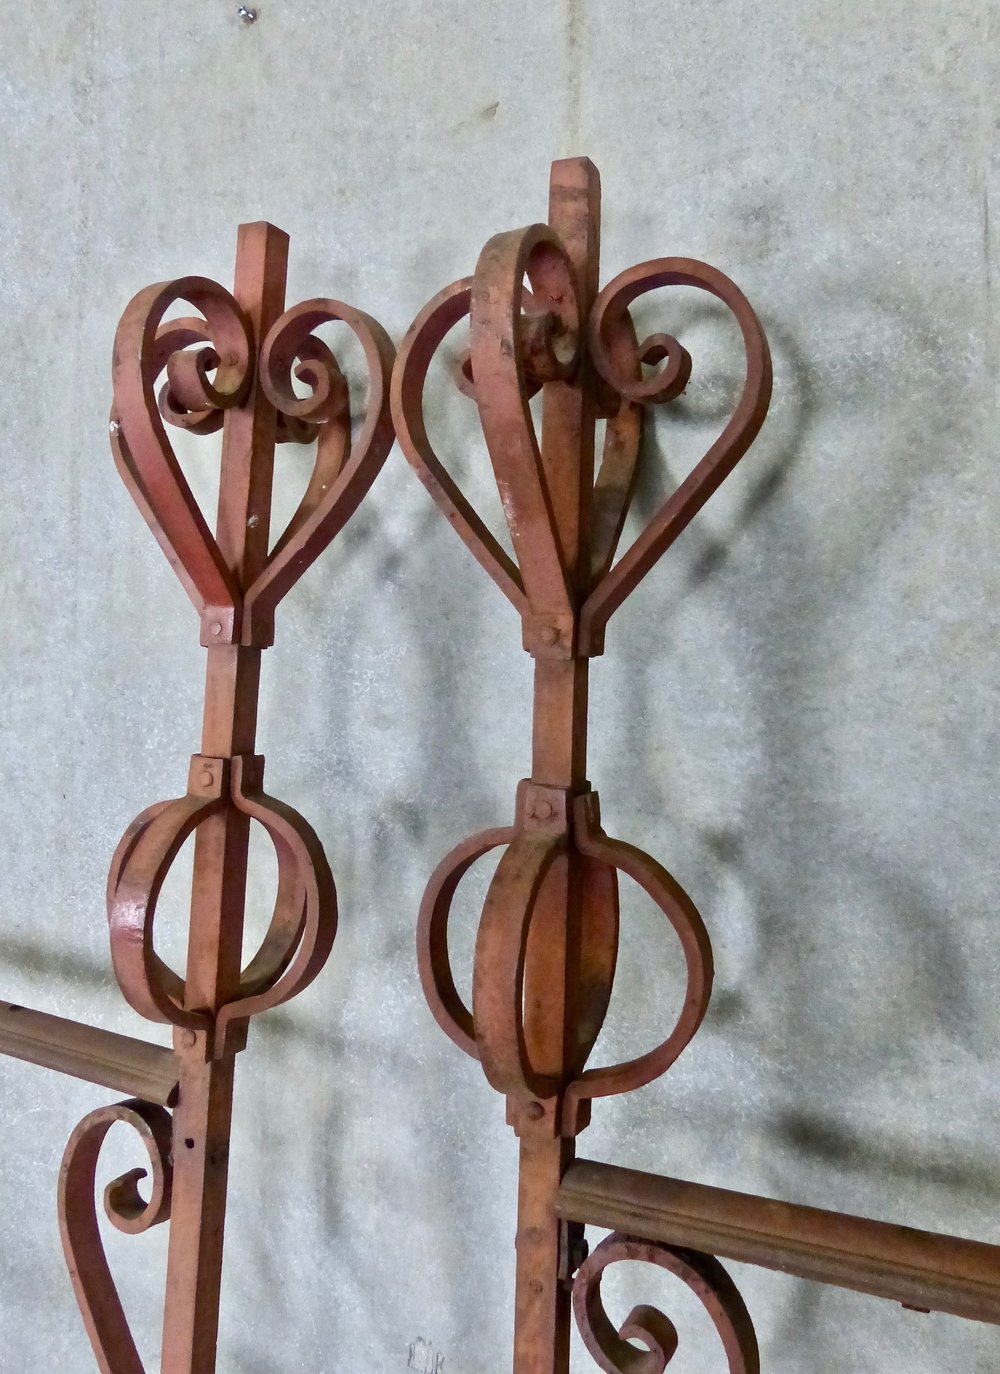 C 1900 Antique wrought iron French driveway gates with decorative finials and original red paint | Scott Landon Antiques and Interiors.